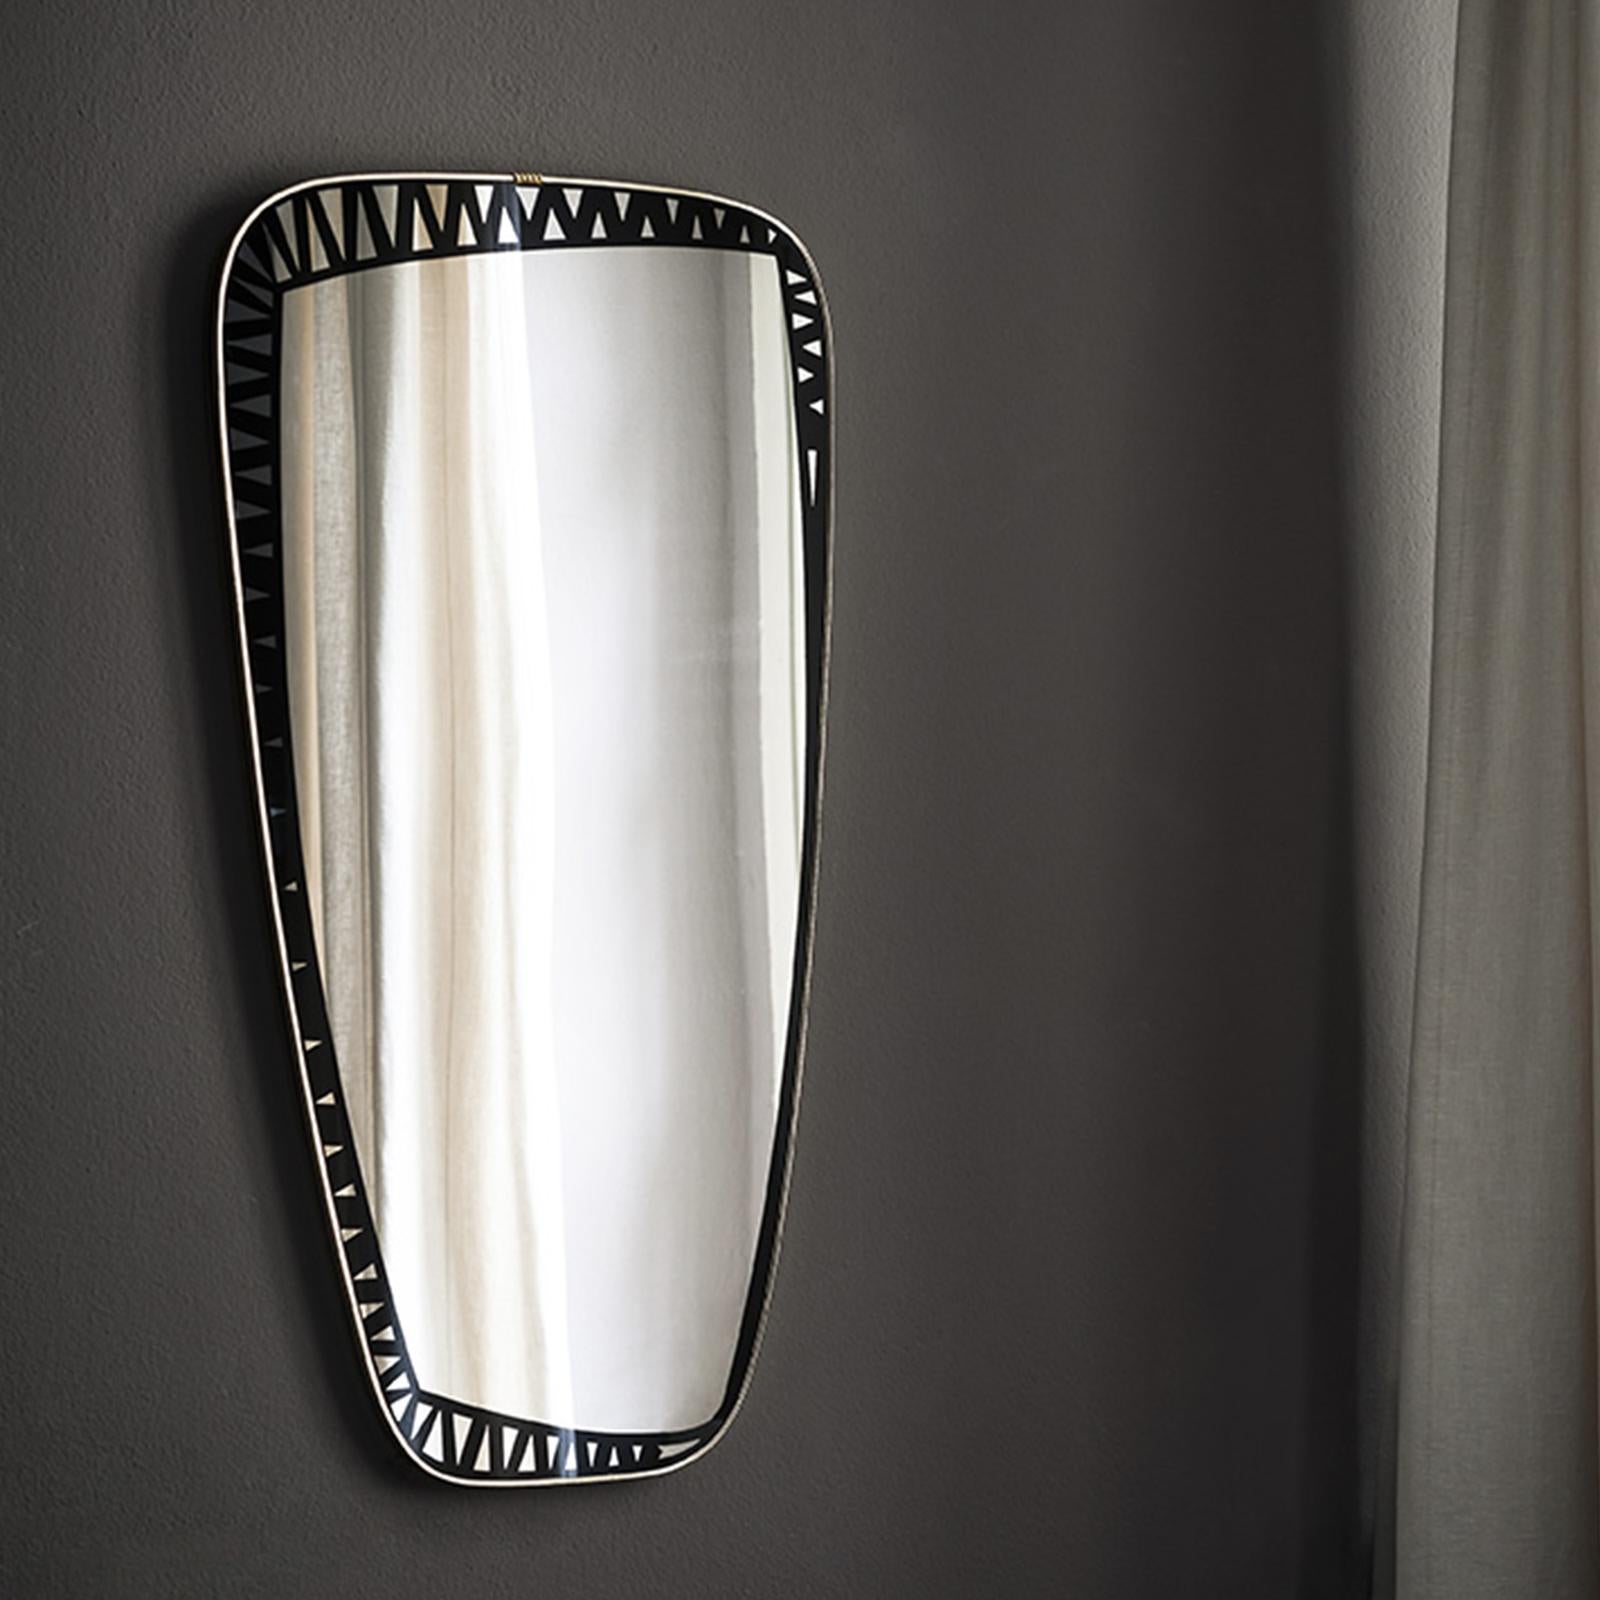 A striking object of functional decor, this mirror is a precious addition to a contemporary home. Either on a mantelpiece in the living room, as welcoming piece in an entryway, or a decorative accent in the bedroom, this mirror will make a